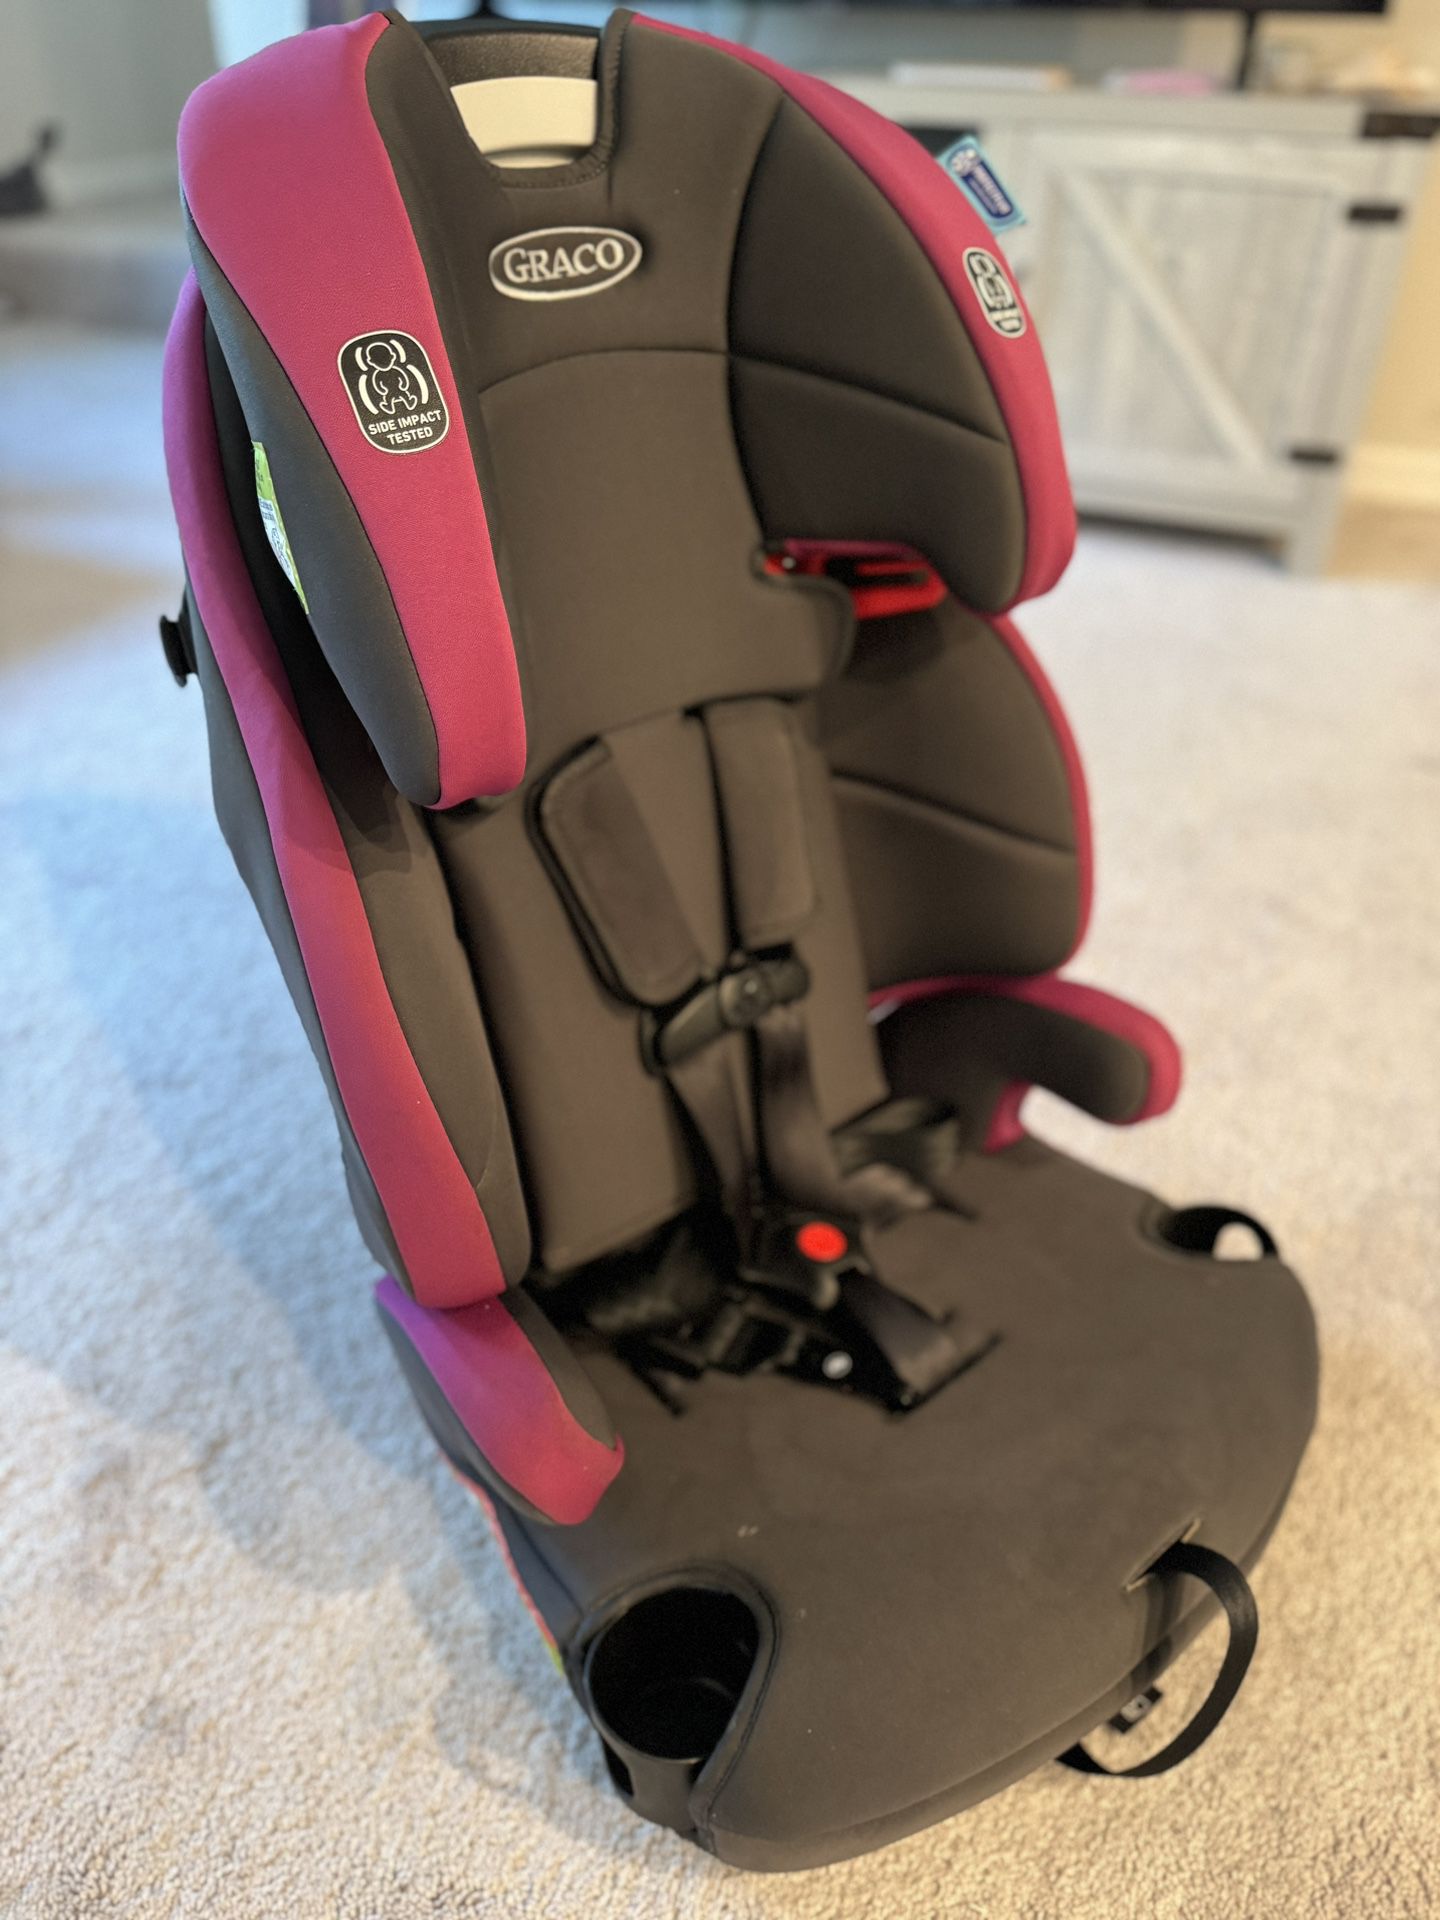 Graco® Tranzitions™ 3-in-1 Forward Facing Harness Booster Car Seat